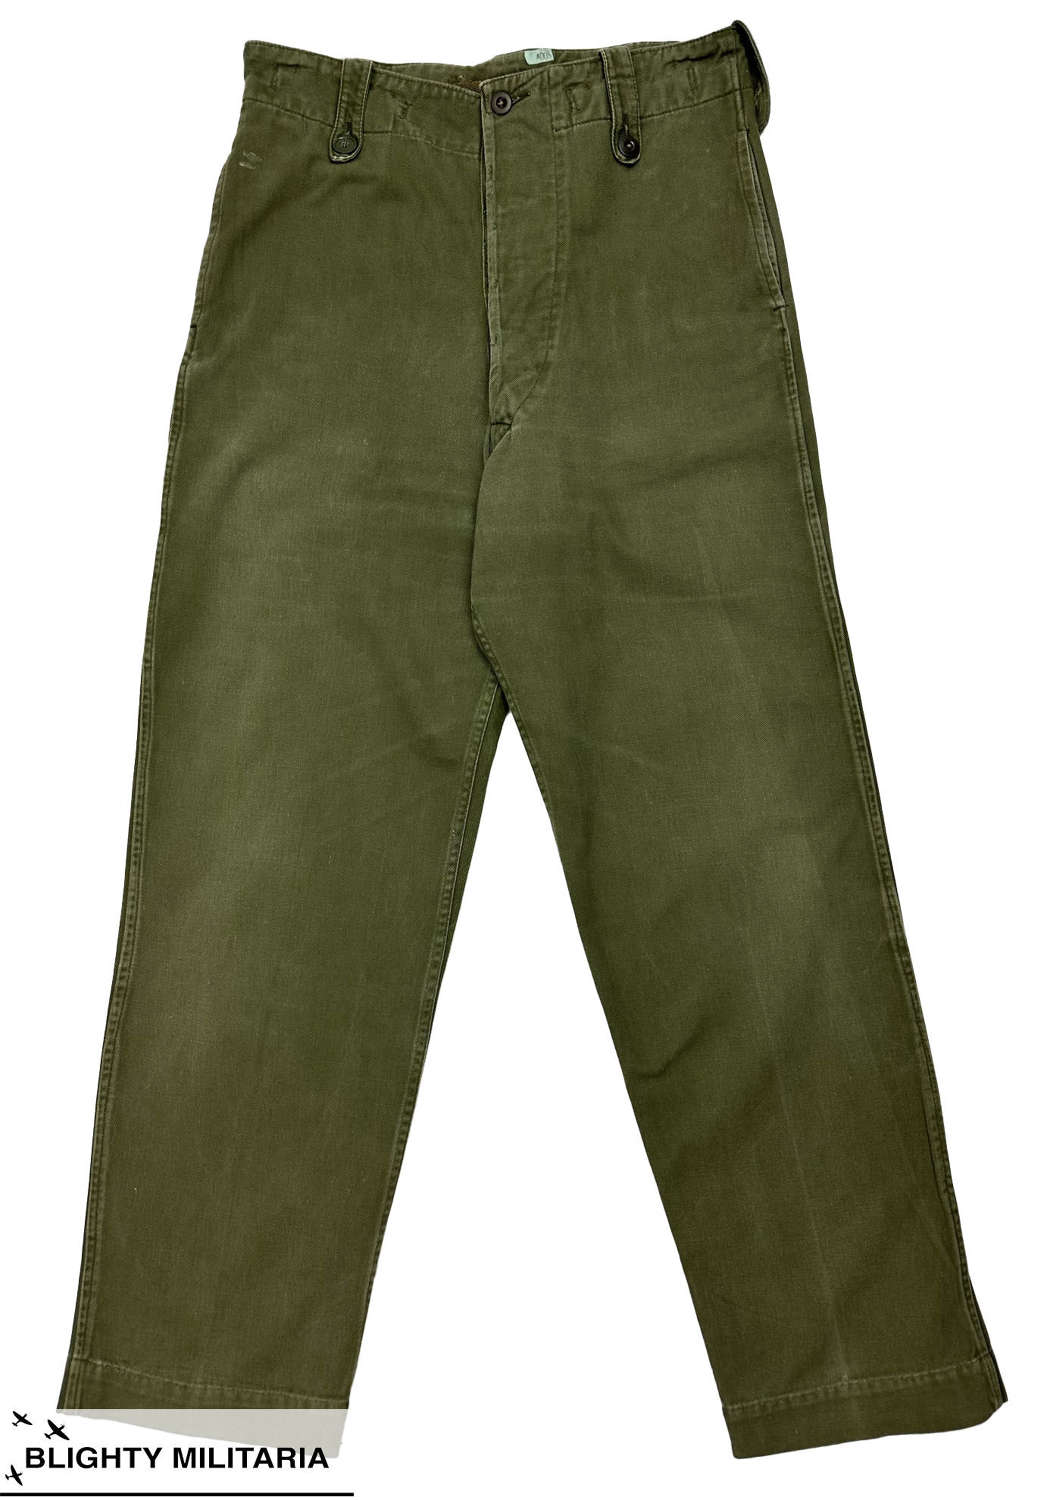 Original 1960s Overall Green Trousers - Size 5 33x30